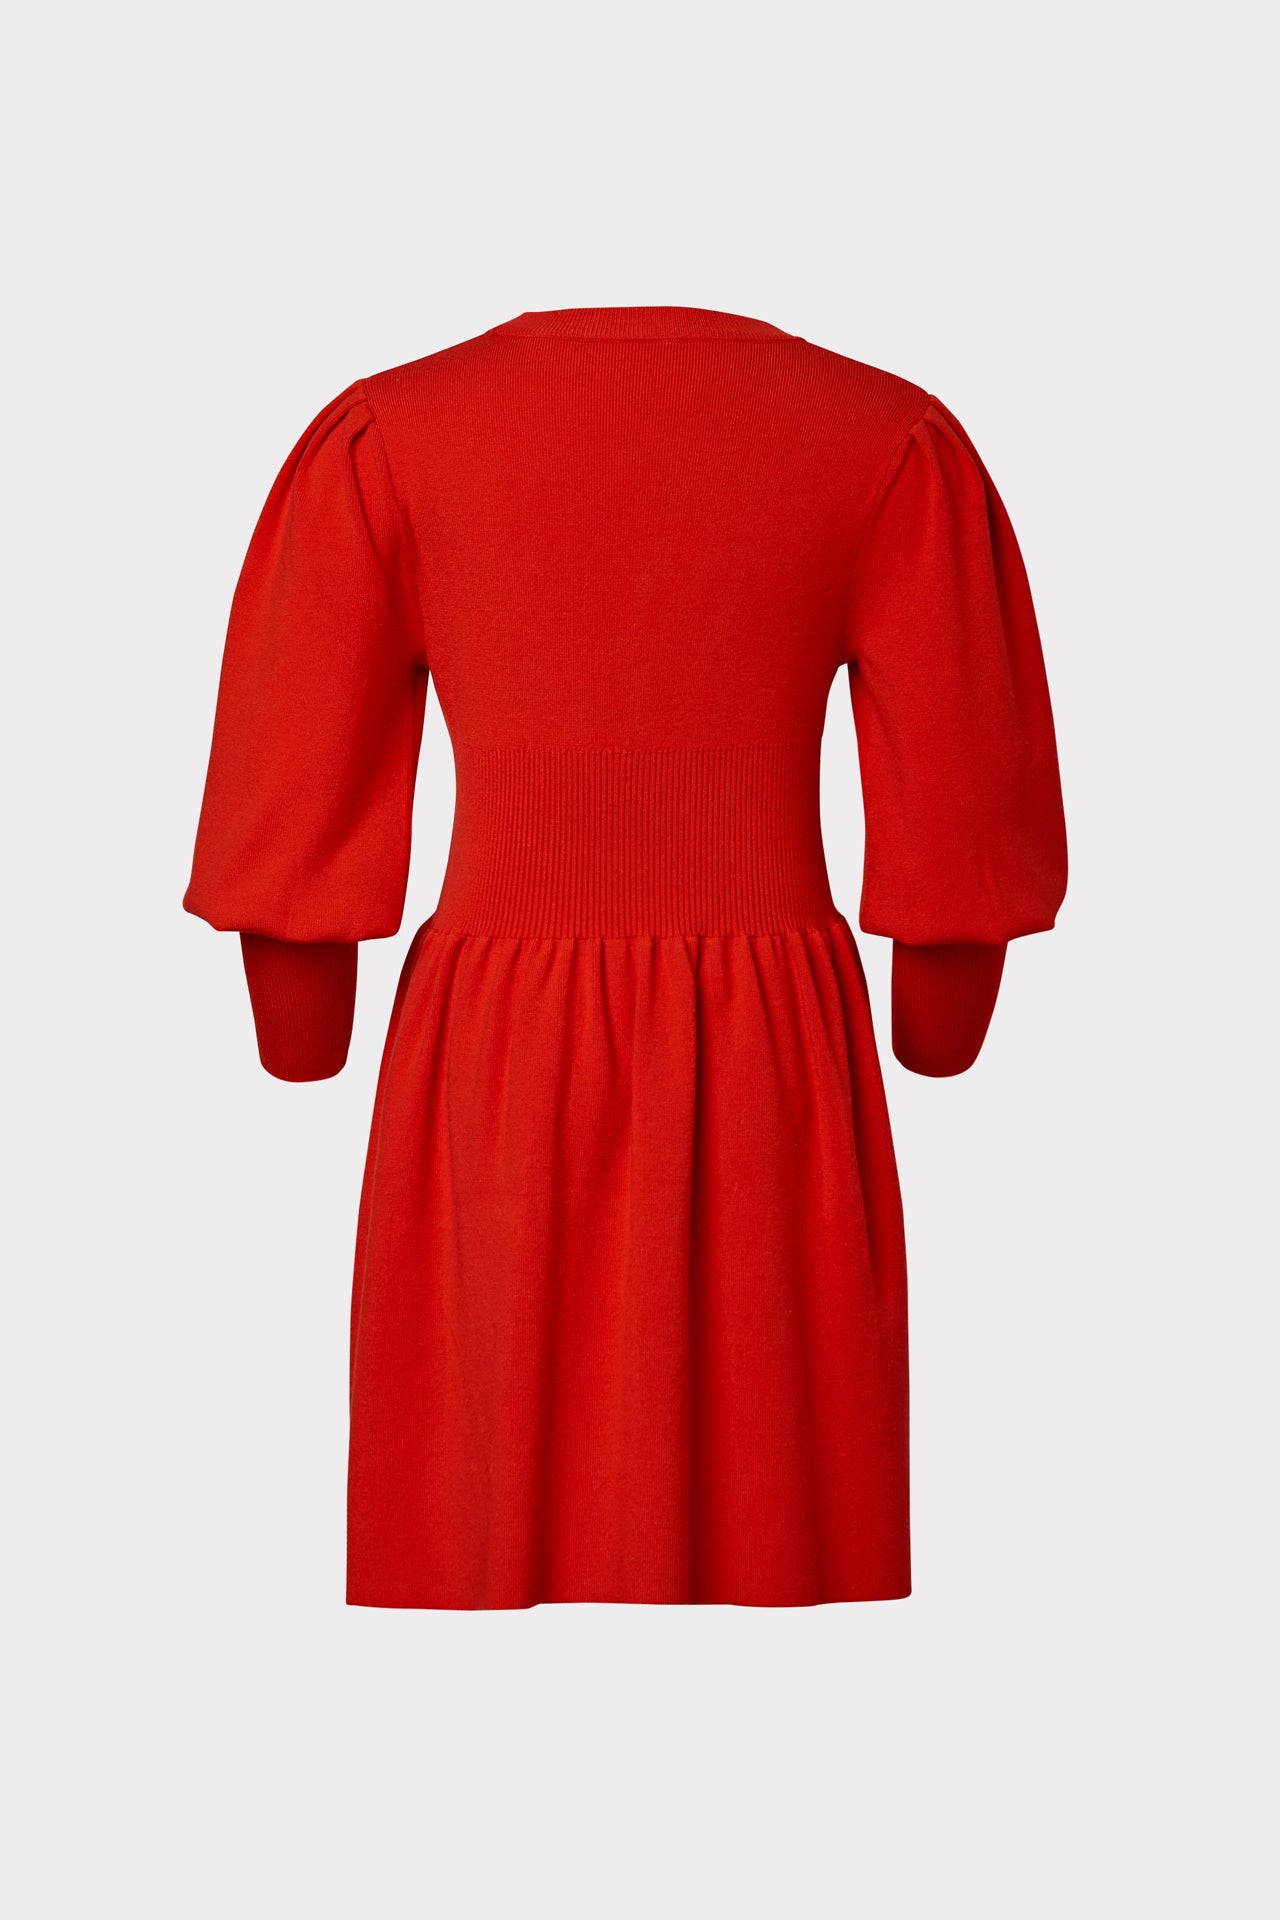 Milly Minis Poof Sleeve Fit & Flare Dress